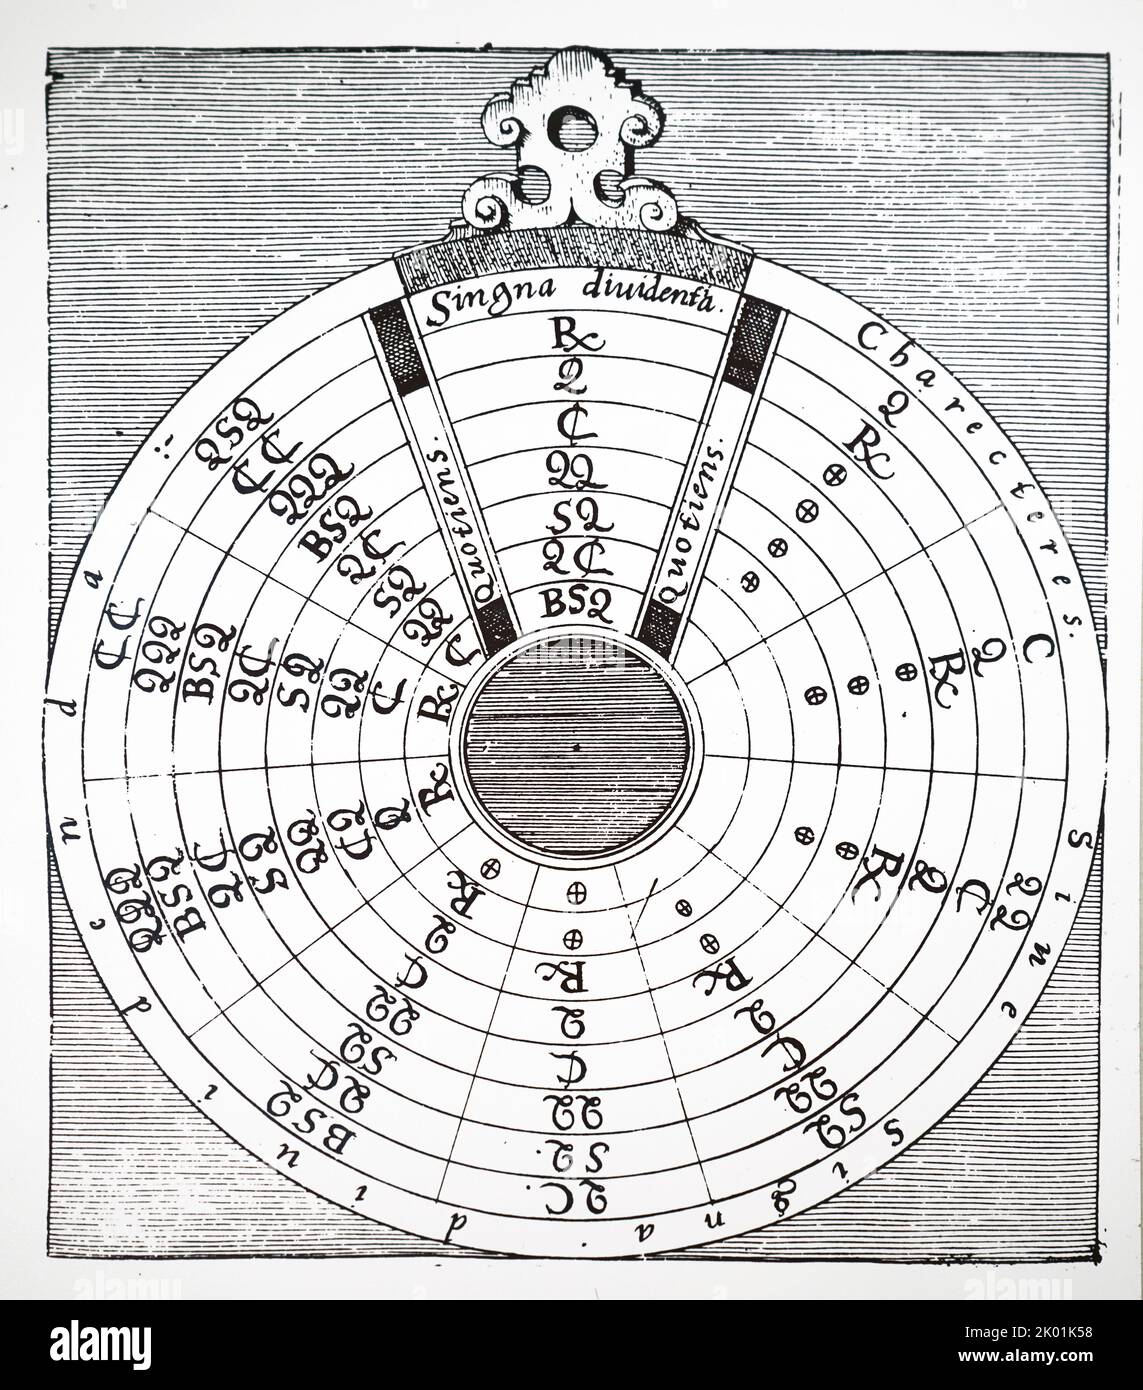 Algebraic division, the procedure being displayed in a circular pattern. From Robert Fludd Utriusque cosmi...historia. Oppenheim, 1617-19. Stock Photo